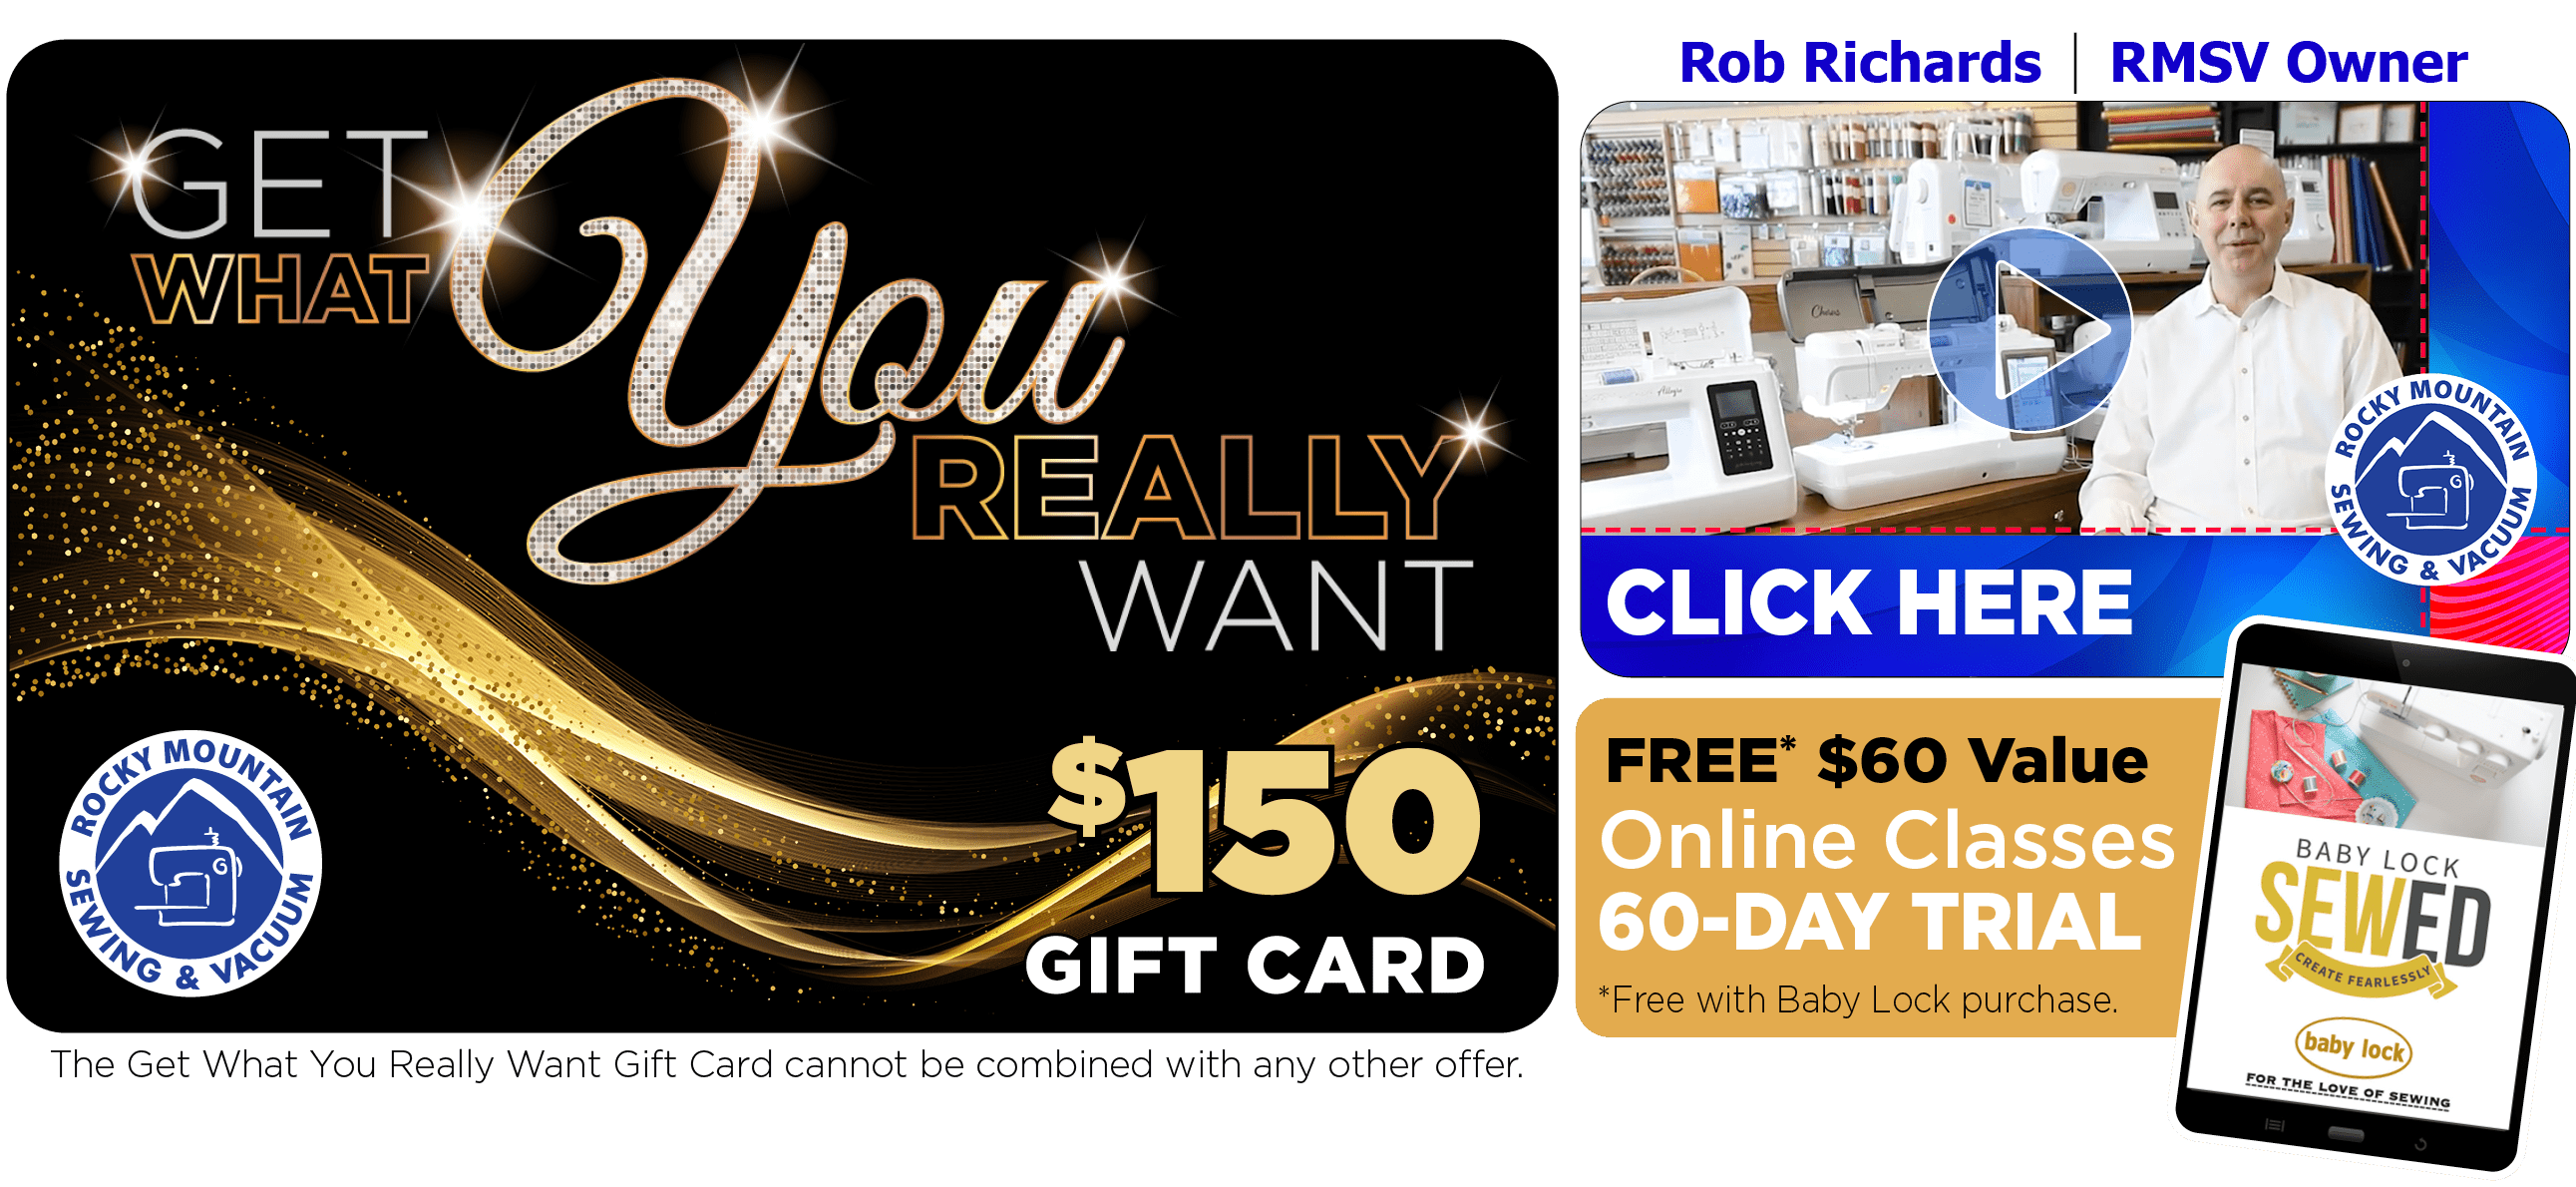 Get What You Really Want $150 Gift Card with Purchase